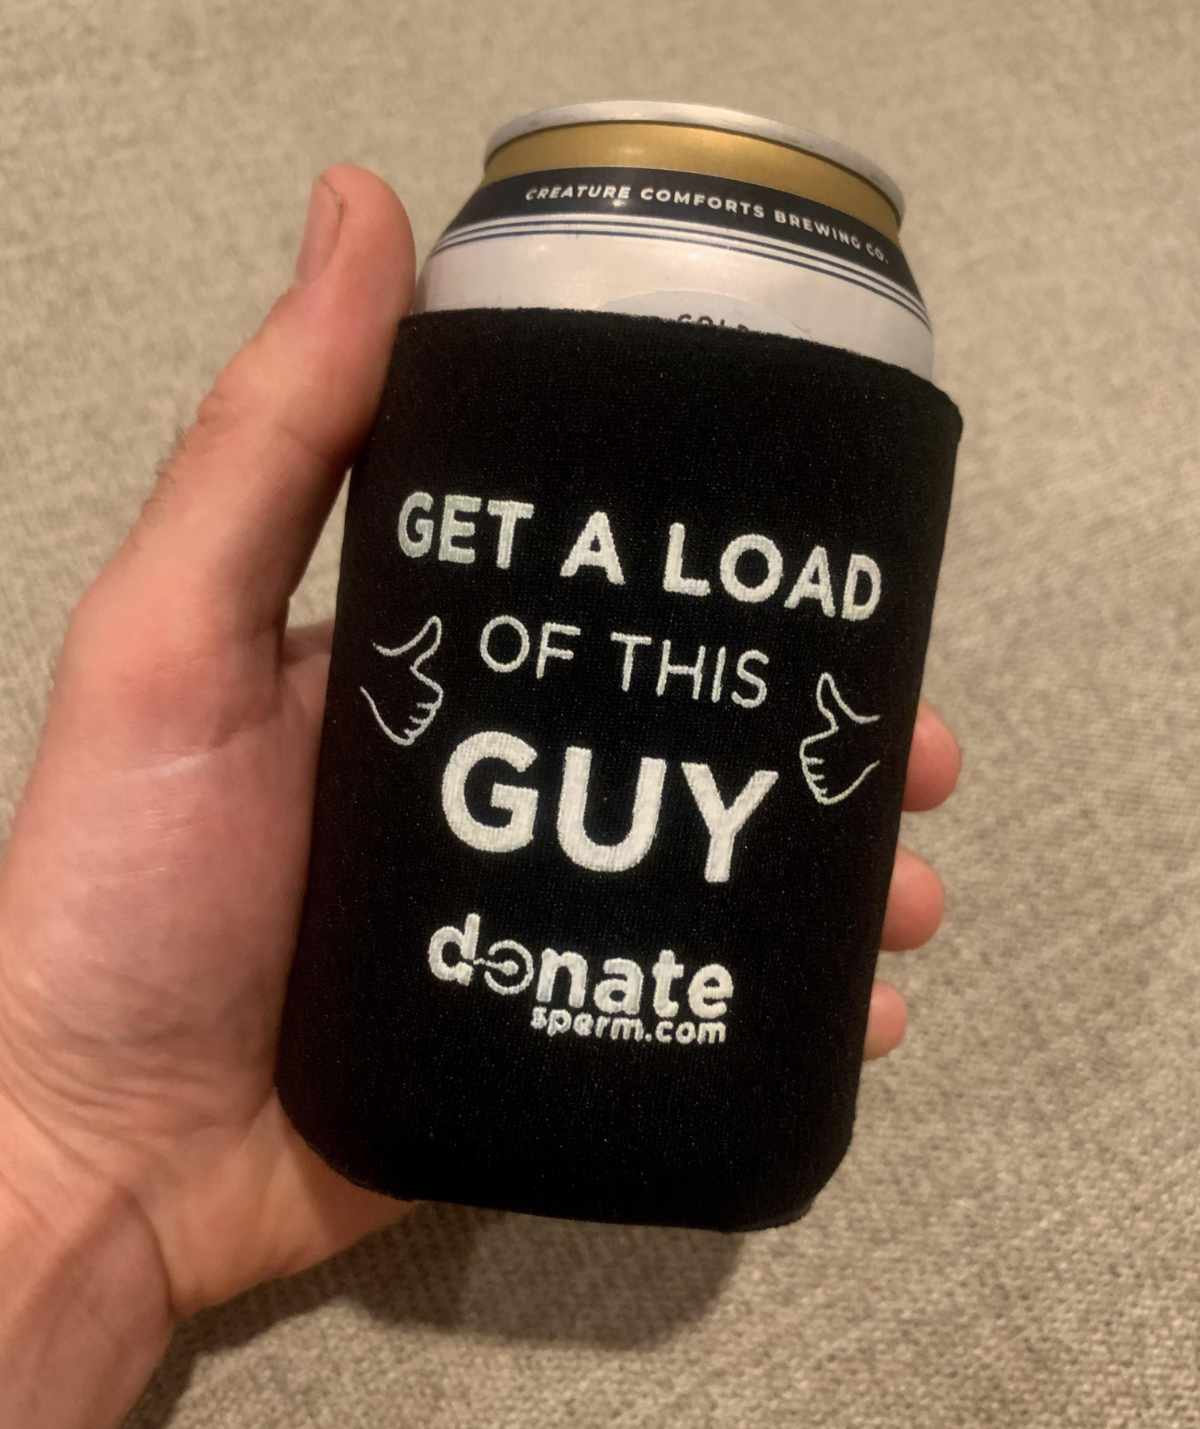 I don’t think I’ve ever been given a better, free koozie